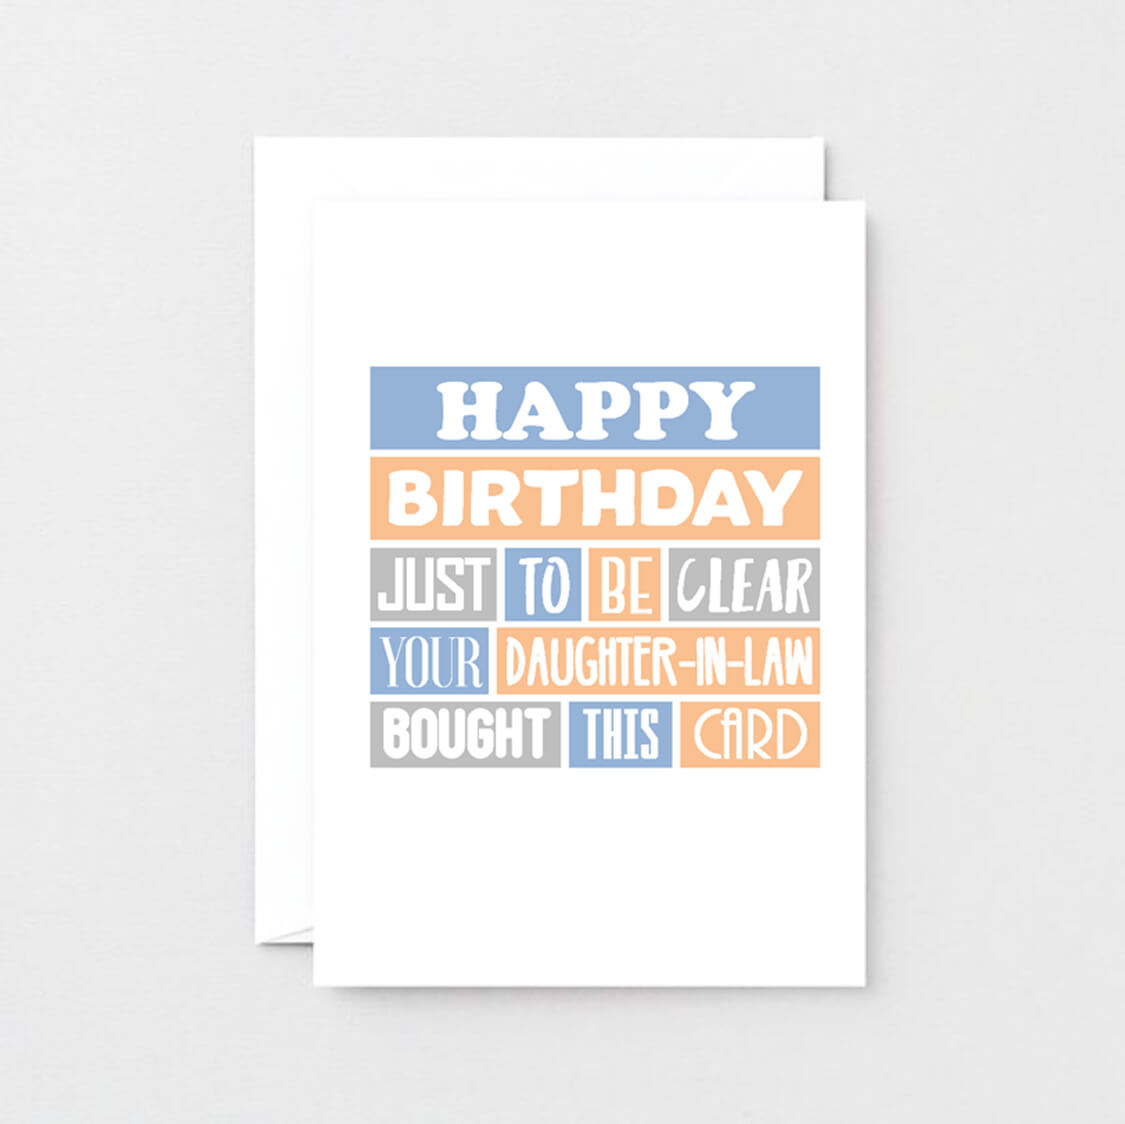 Father-in-Law Birthday Card by SixElevenCreations. Reads Happy birthday. Just to be clear your daughter-in-law bought this card. Product Code SE0205A6